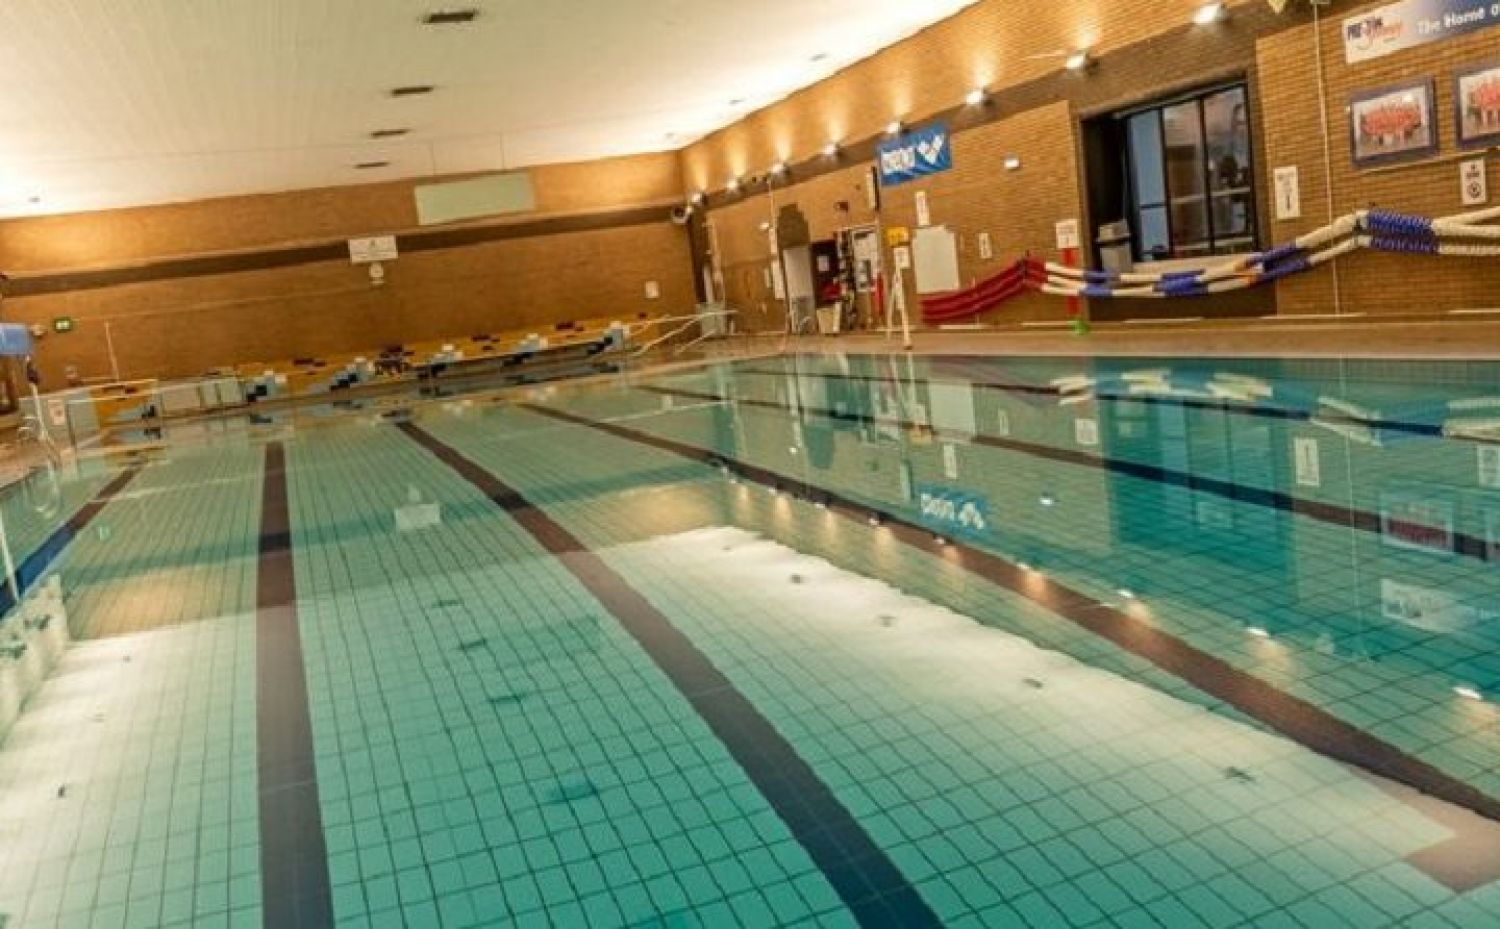 West View Leisure Centre Faces Closure - Yet Petition May Prevent